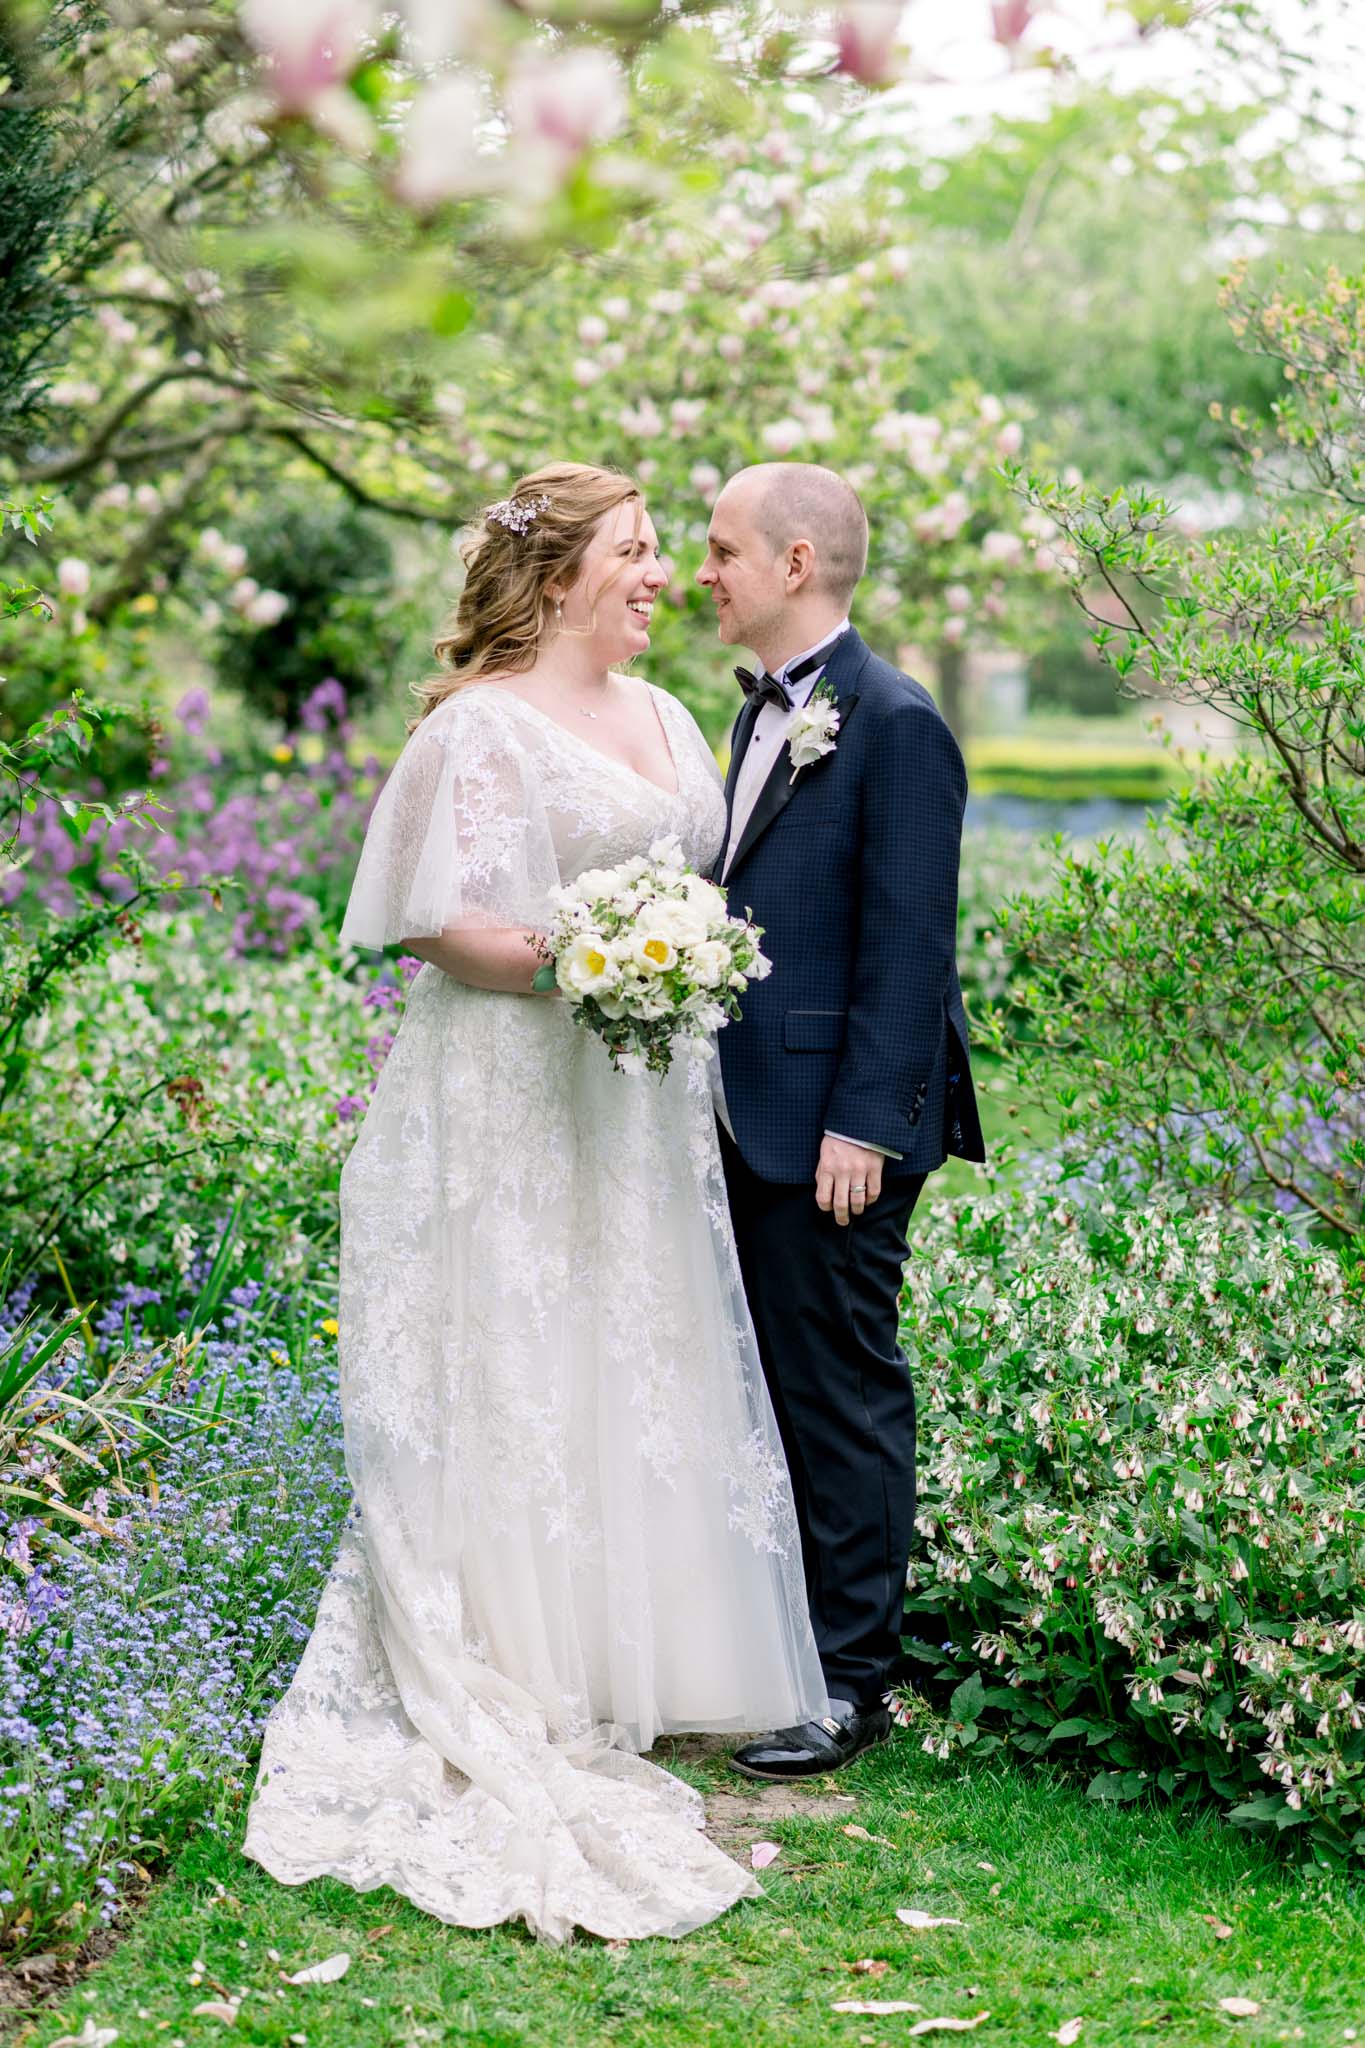 https://usercontent.one/wp/www.natalieandmax.co.uk/wp-content/uploads/2022/04/SG-Forty-Hall-Wedding-Photographer-by-Natalie-and-Max-Photo-and-Films-575.jpg?media=1654418125